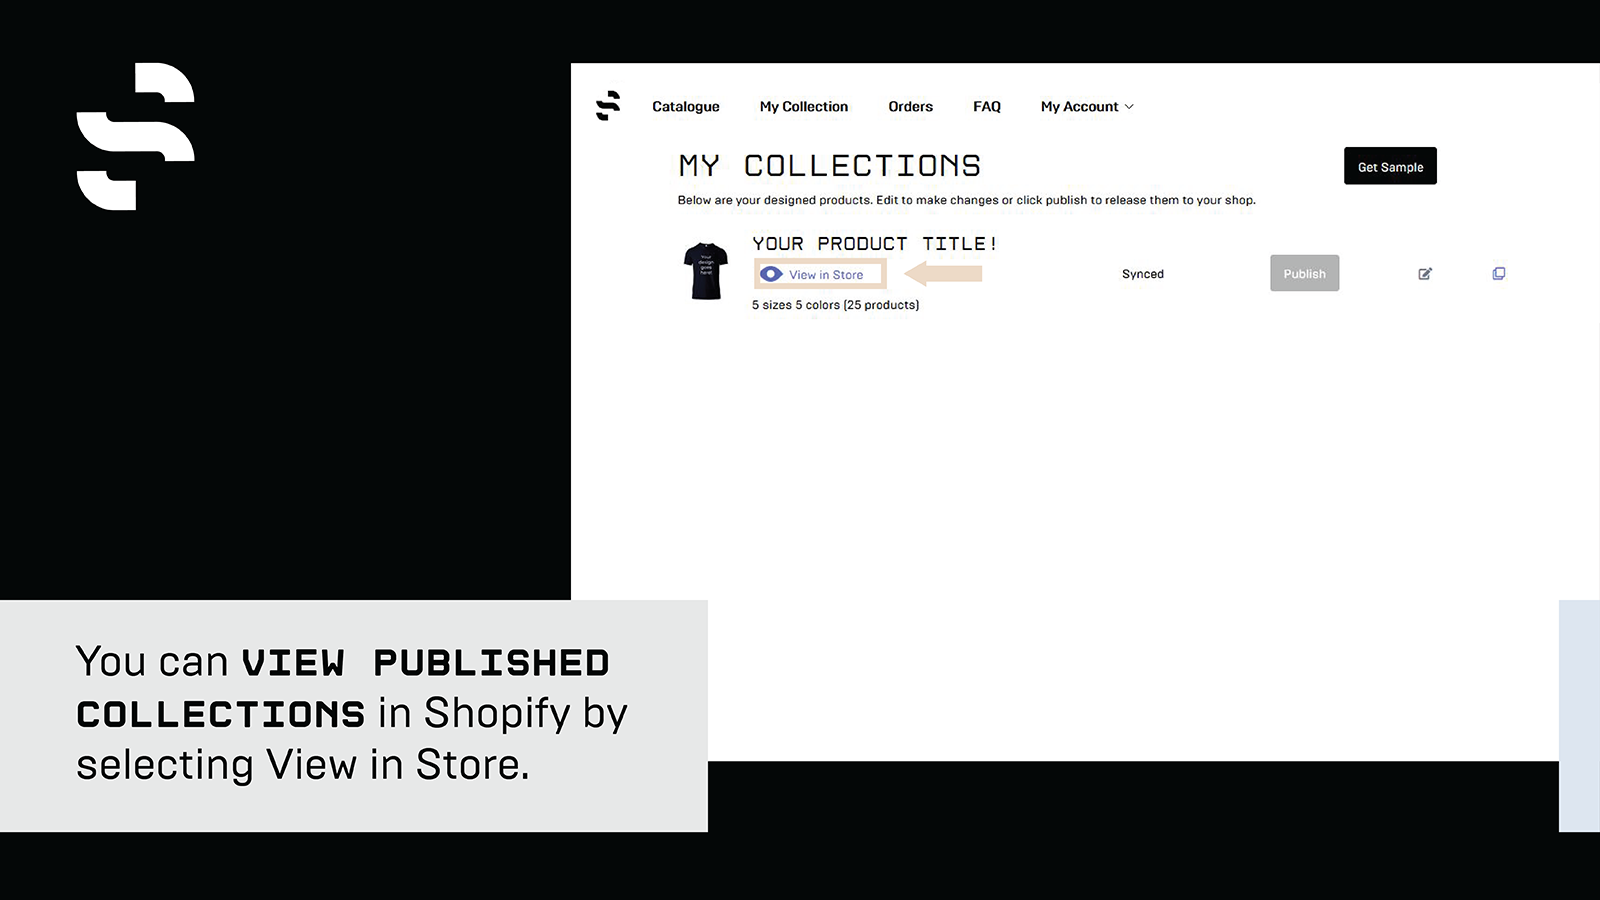 View published collections in Shopify